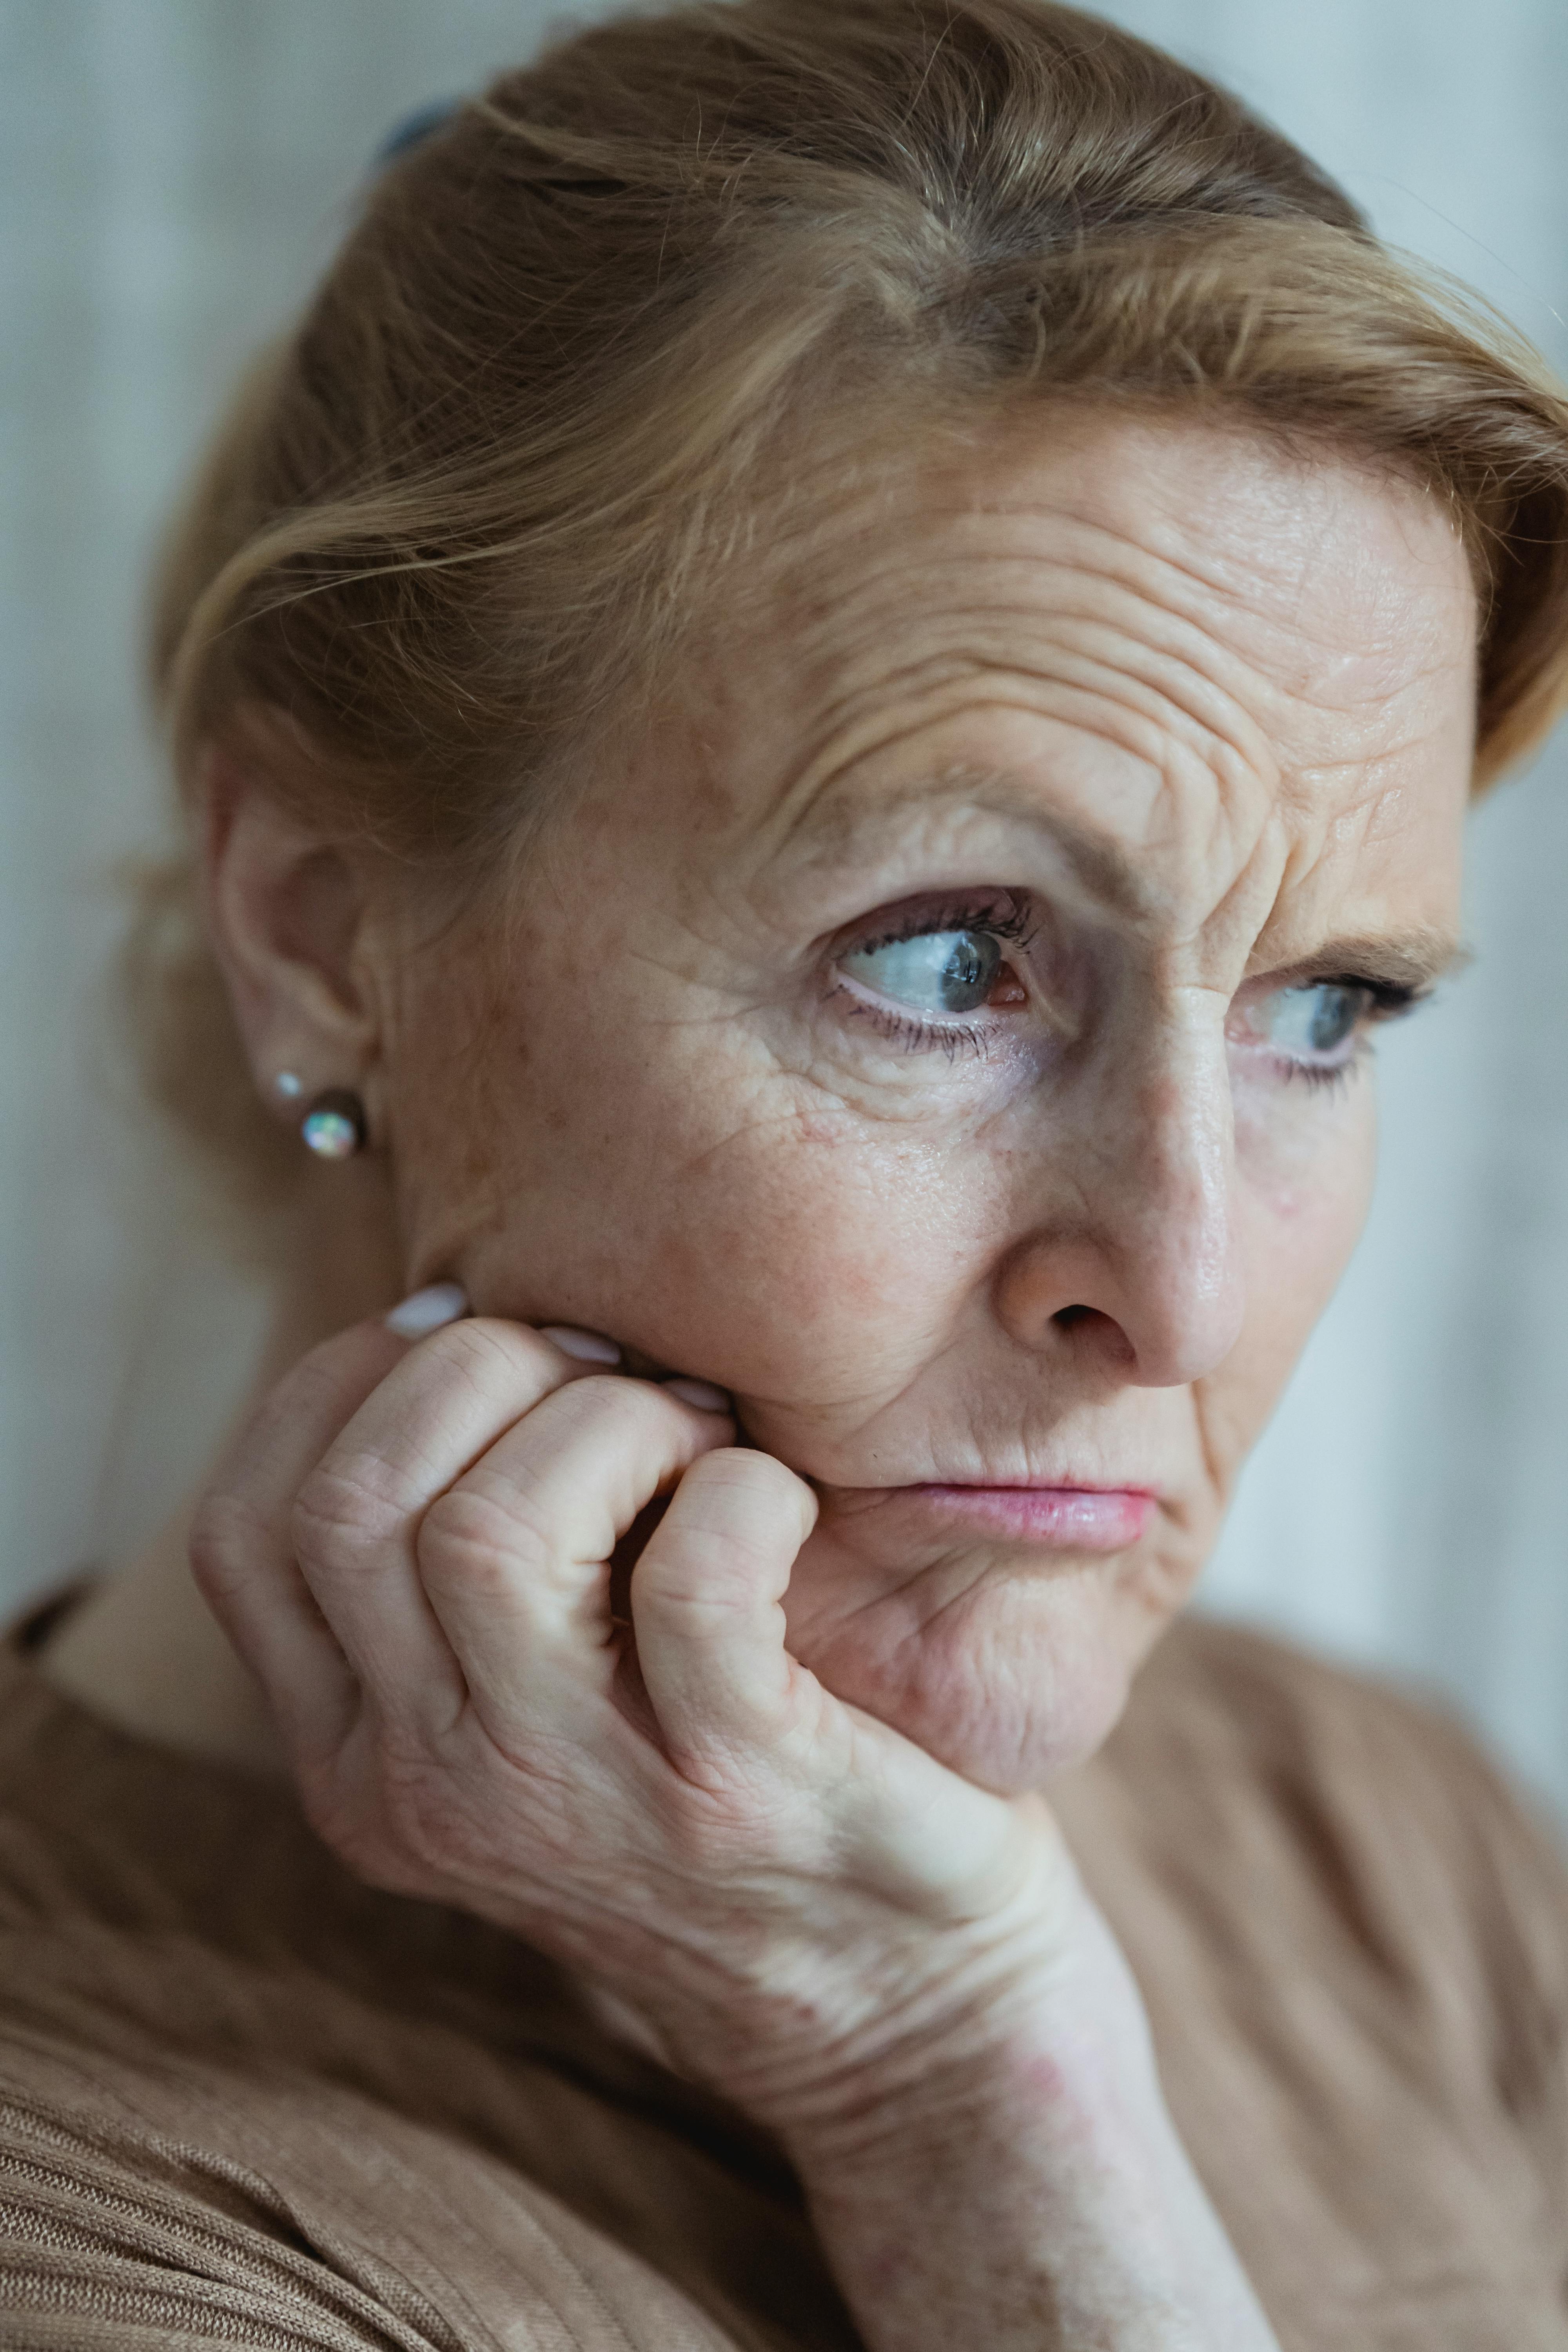 A disapproving older woman | Source: Pexels